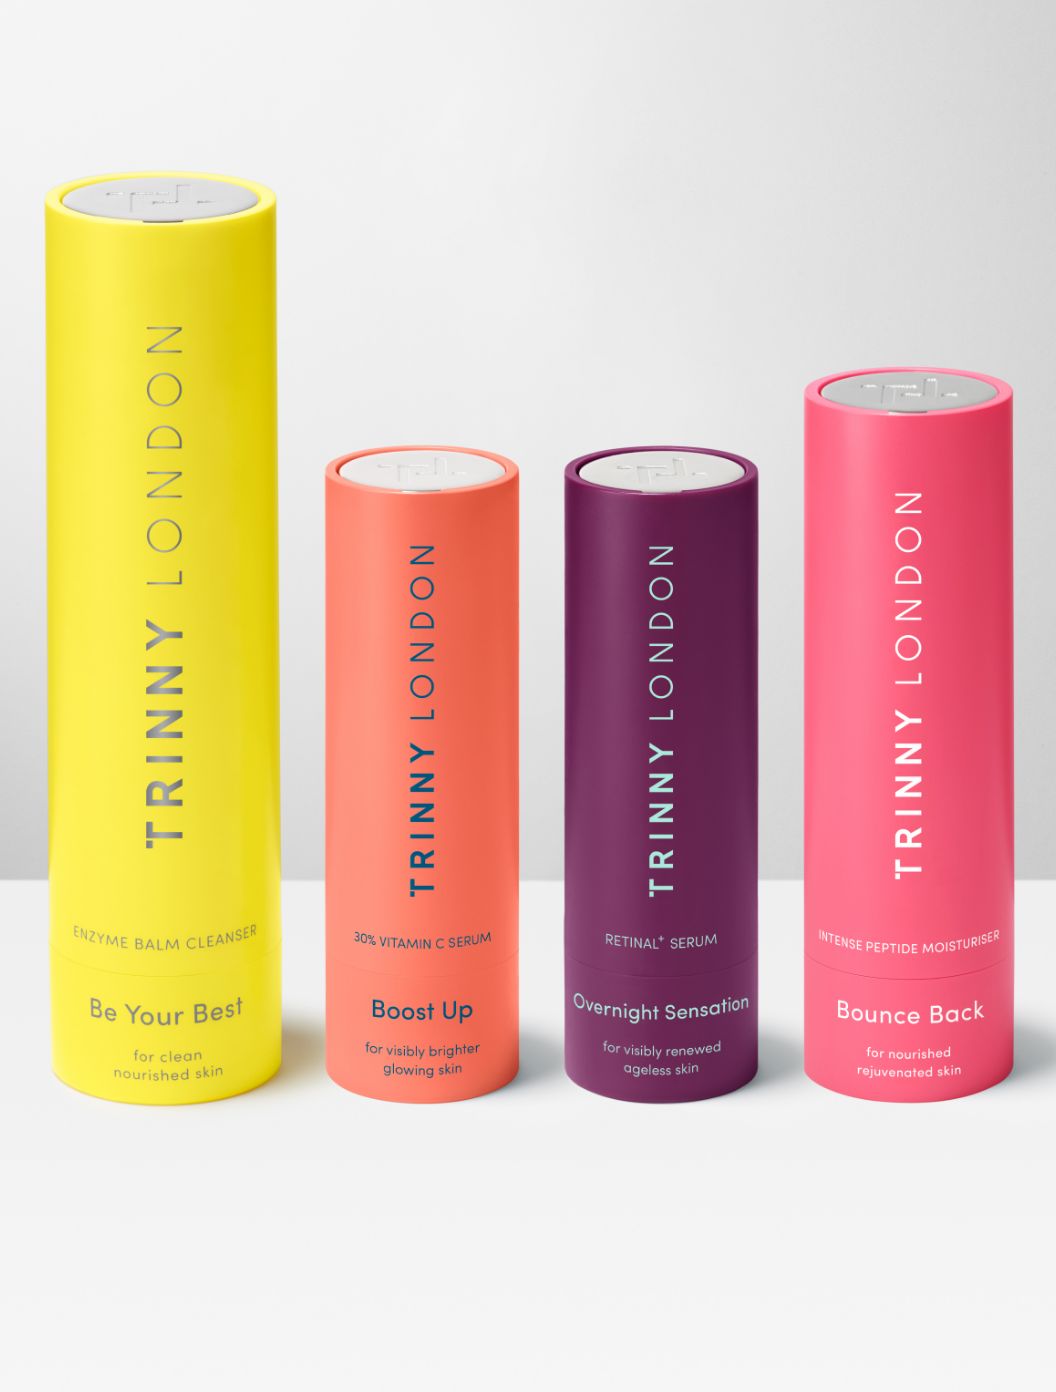 Balm-Boost up- Overnight Sensation-Bounce Back COLLECTION